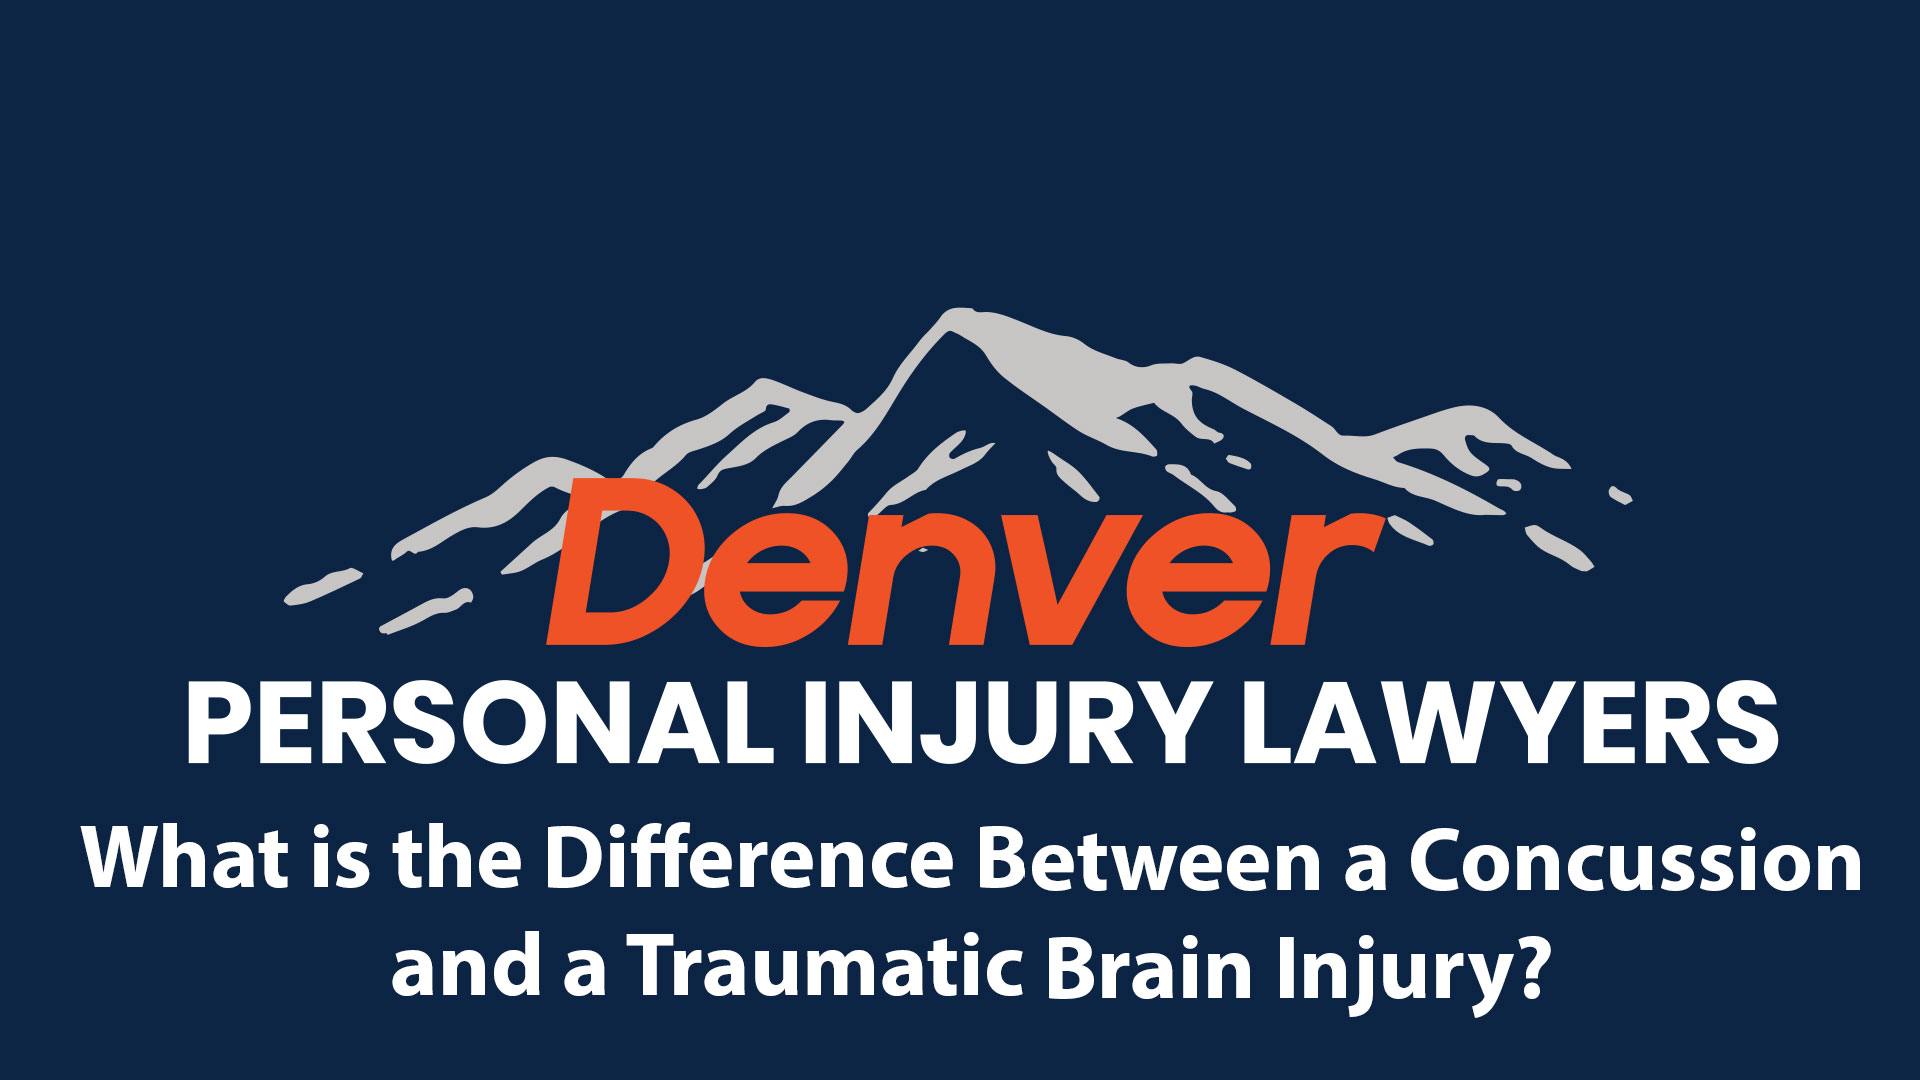 What is the Difference Between a Concussion and a Traumatic Brain Injury?